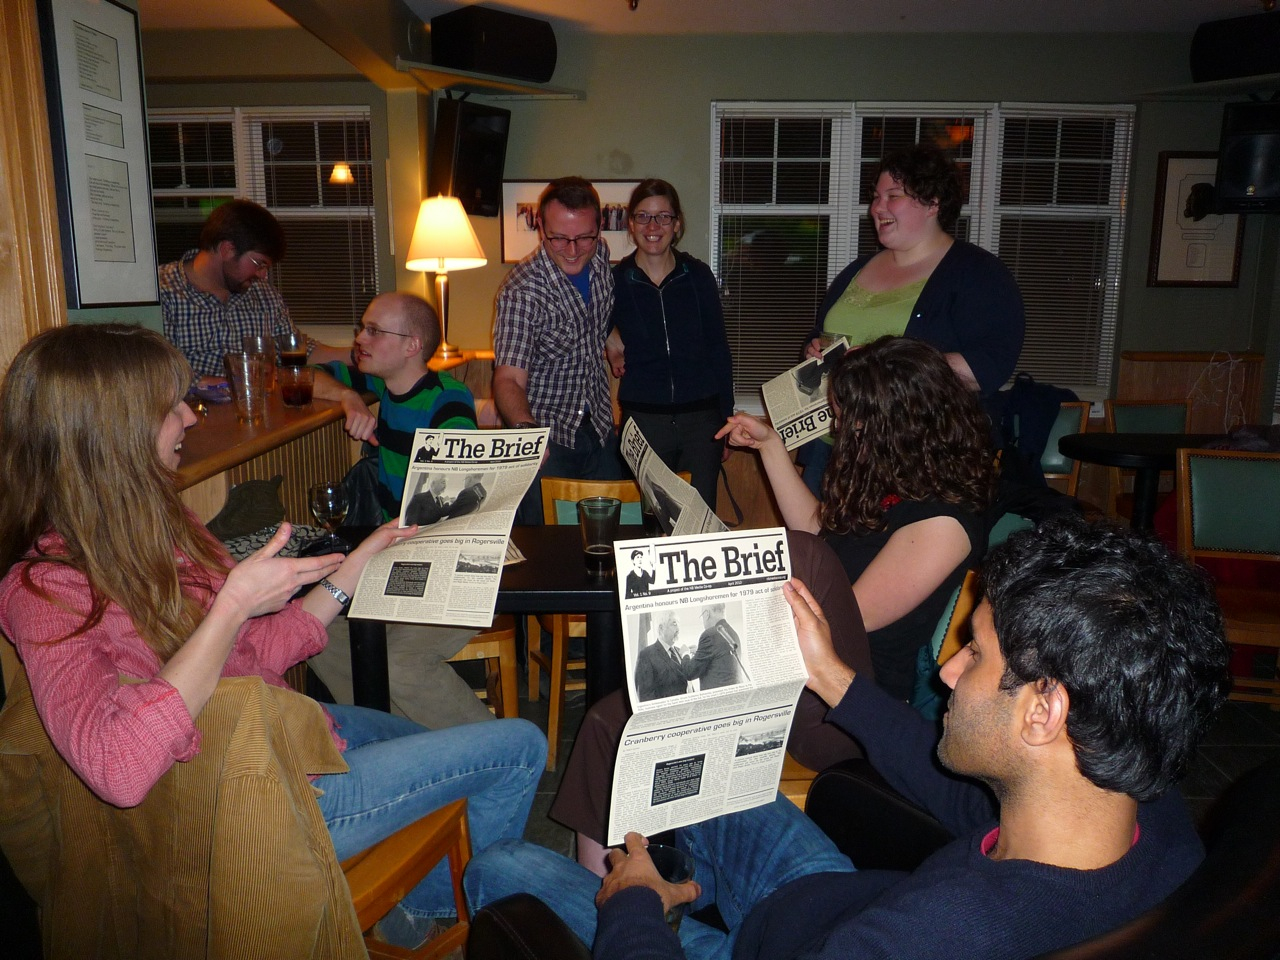 A group of people gathered together, some reading the Brief newsletter  